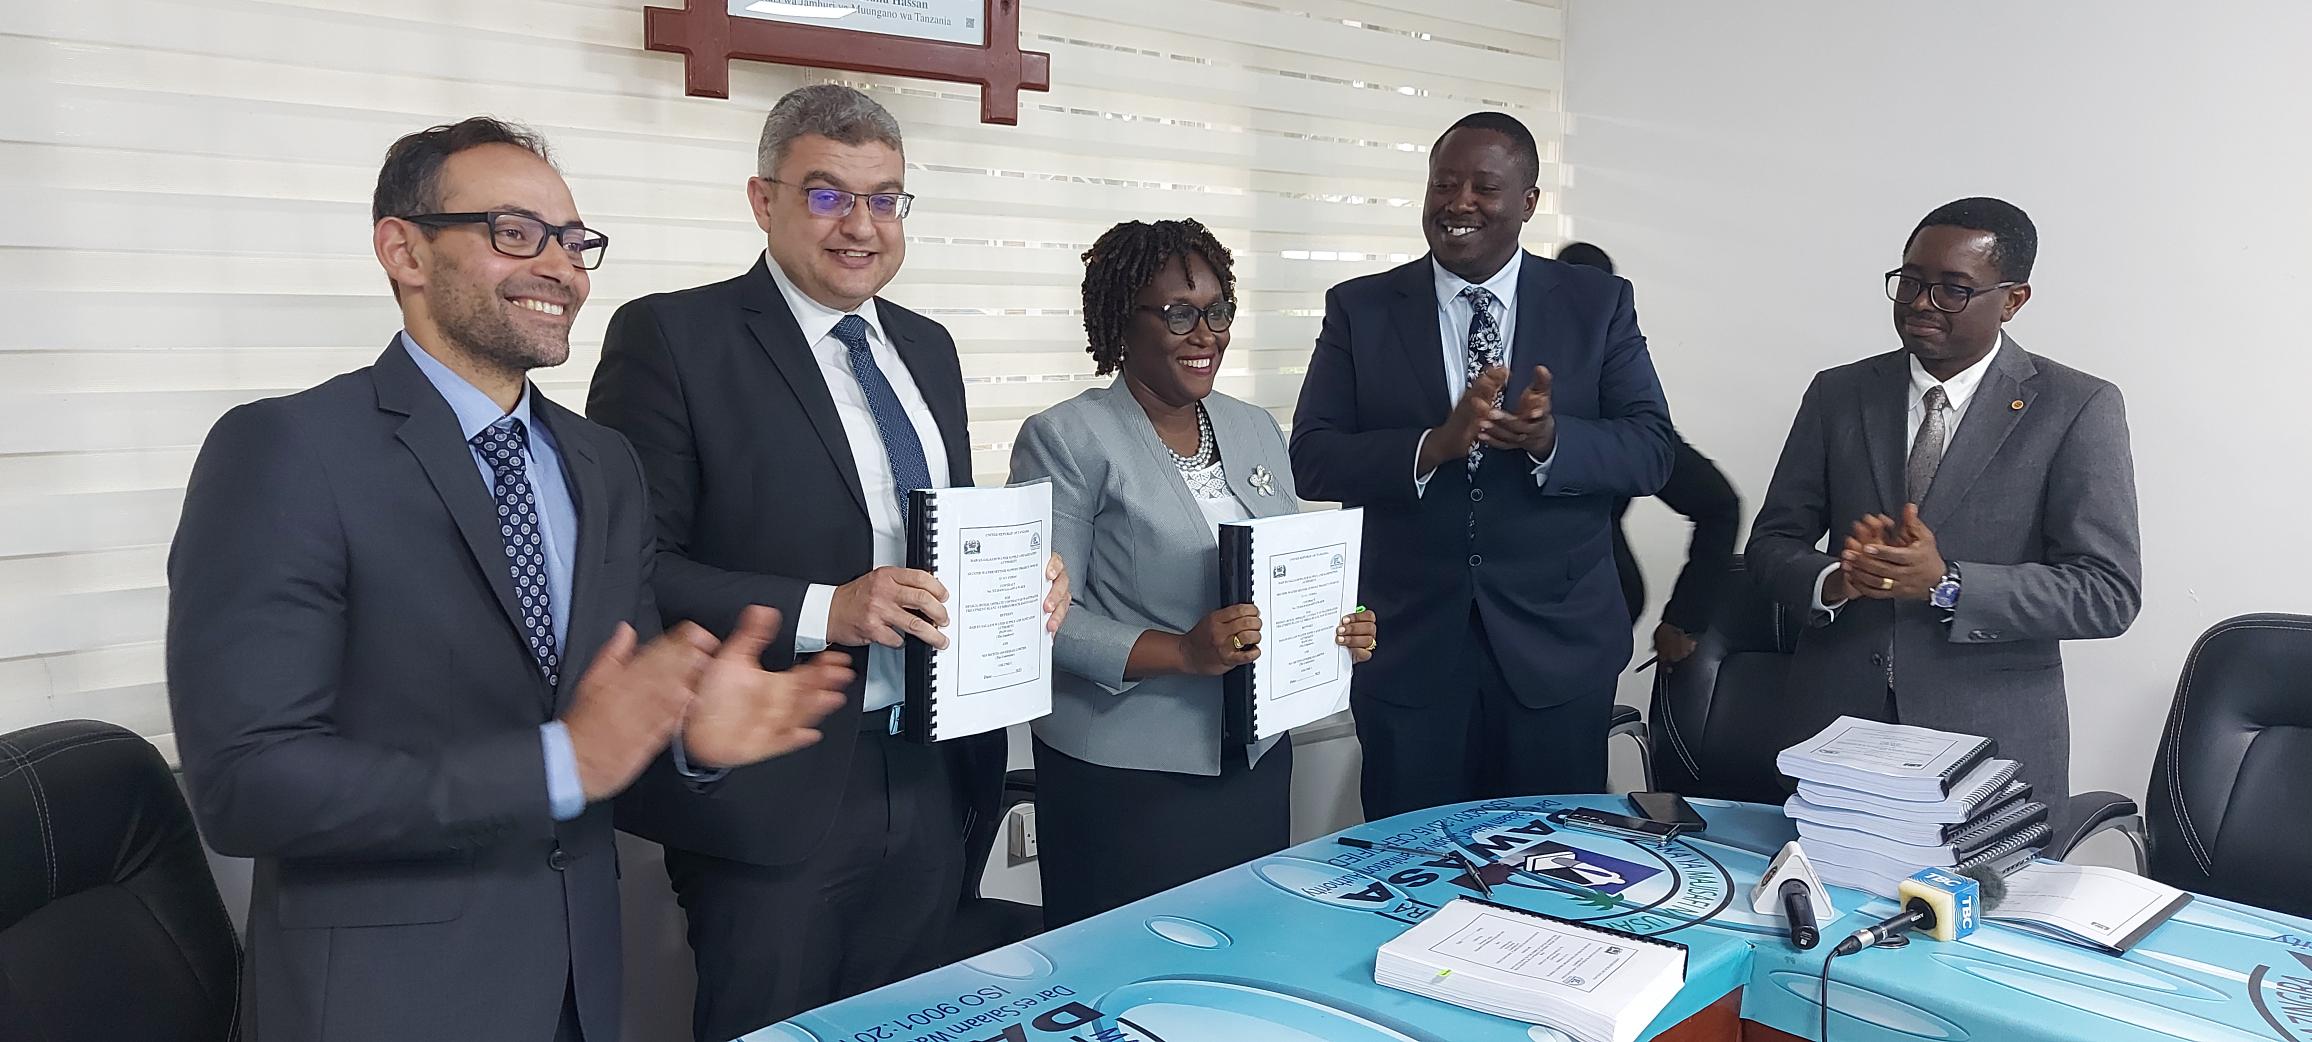 Tanzania to develop its first wastewater treatment plant project Dar es Salaam Water Supply and Sanitation Authority appoints Metito to develop the first of its type project